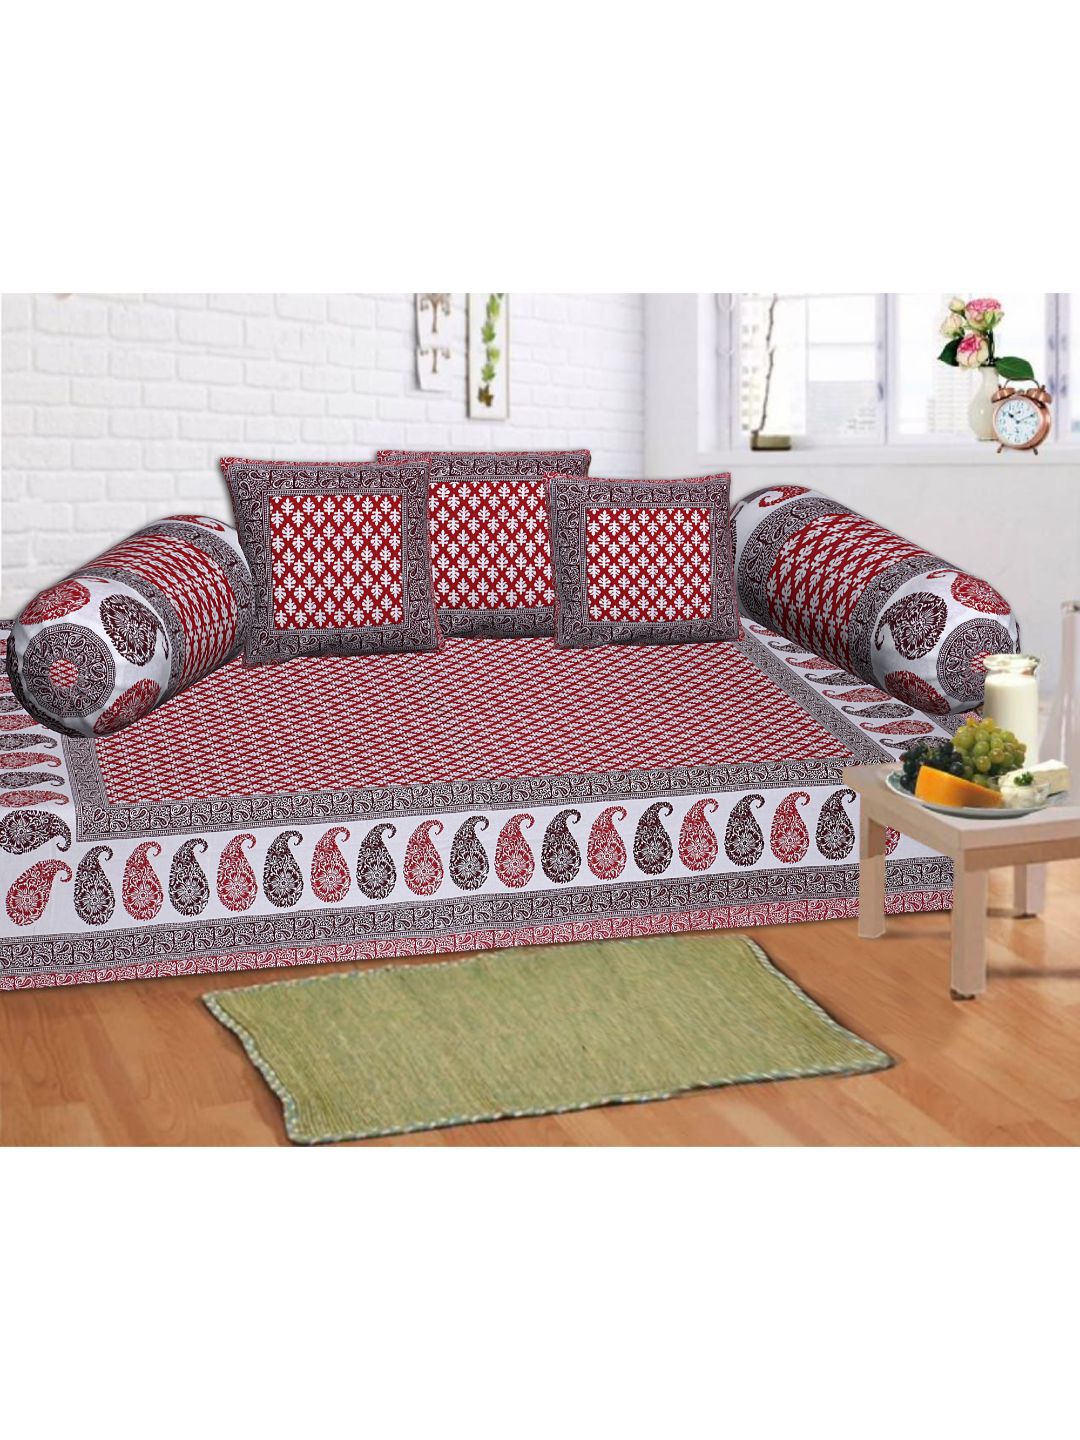 INDHOME LIFE Set Of 6 Red & Brown Printed  Cotton Bedsheet With Bolster & Cushion Covers Price in India